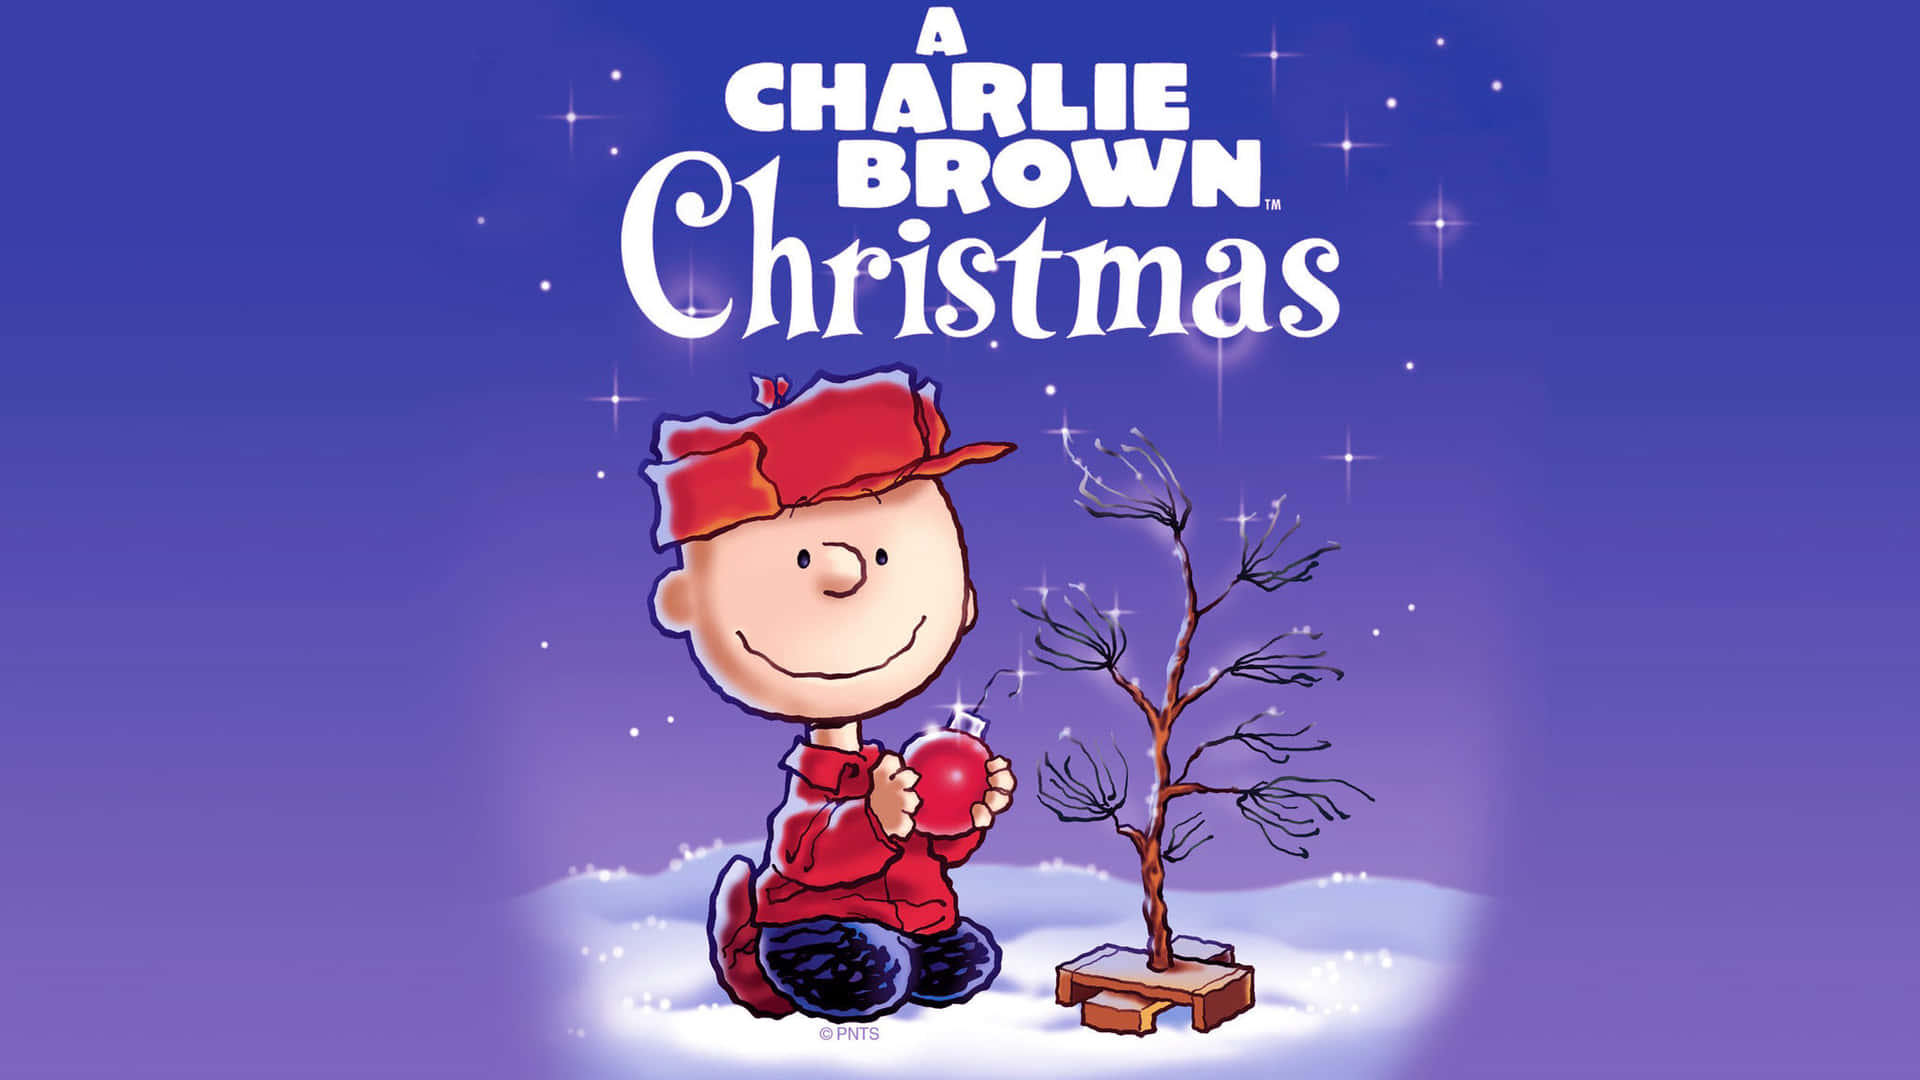 A Charlie Brown Christmas Film Poster Background